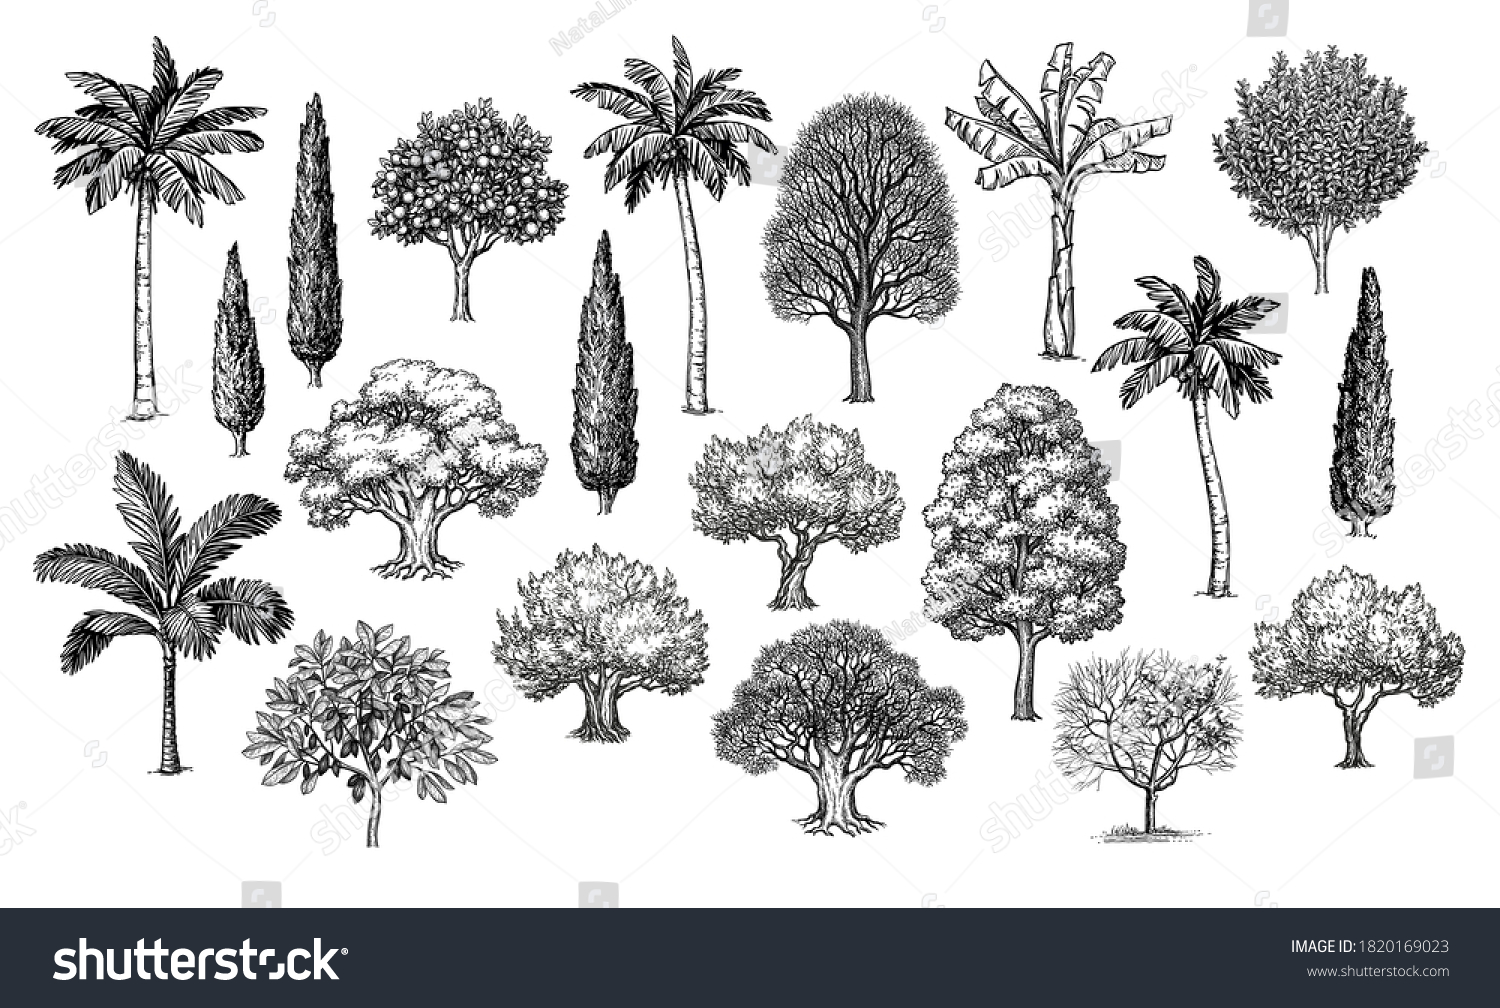 SVG of Big collection of trees. Ink sketches set isolated on white background. Hand drawn vector illustration. Retro style. svg